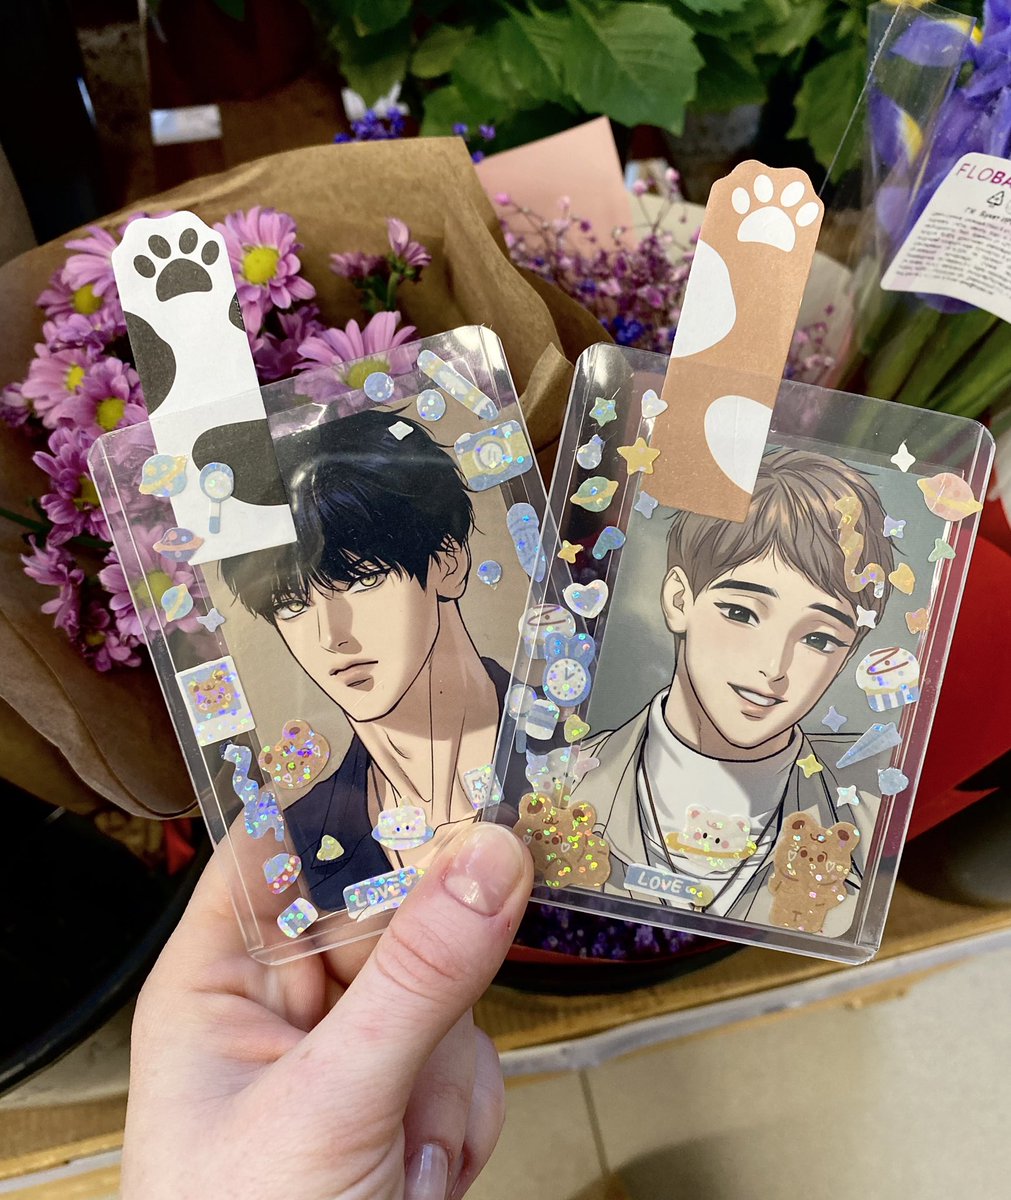 just noticed flowers today and took the picture of husbands 🌸💘

#bjalex #BJ알렉스